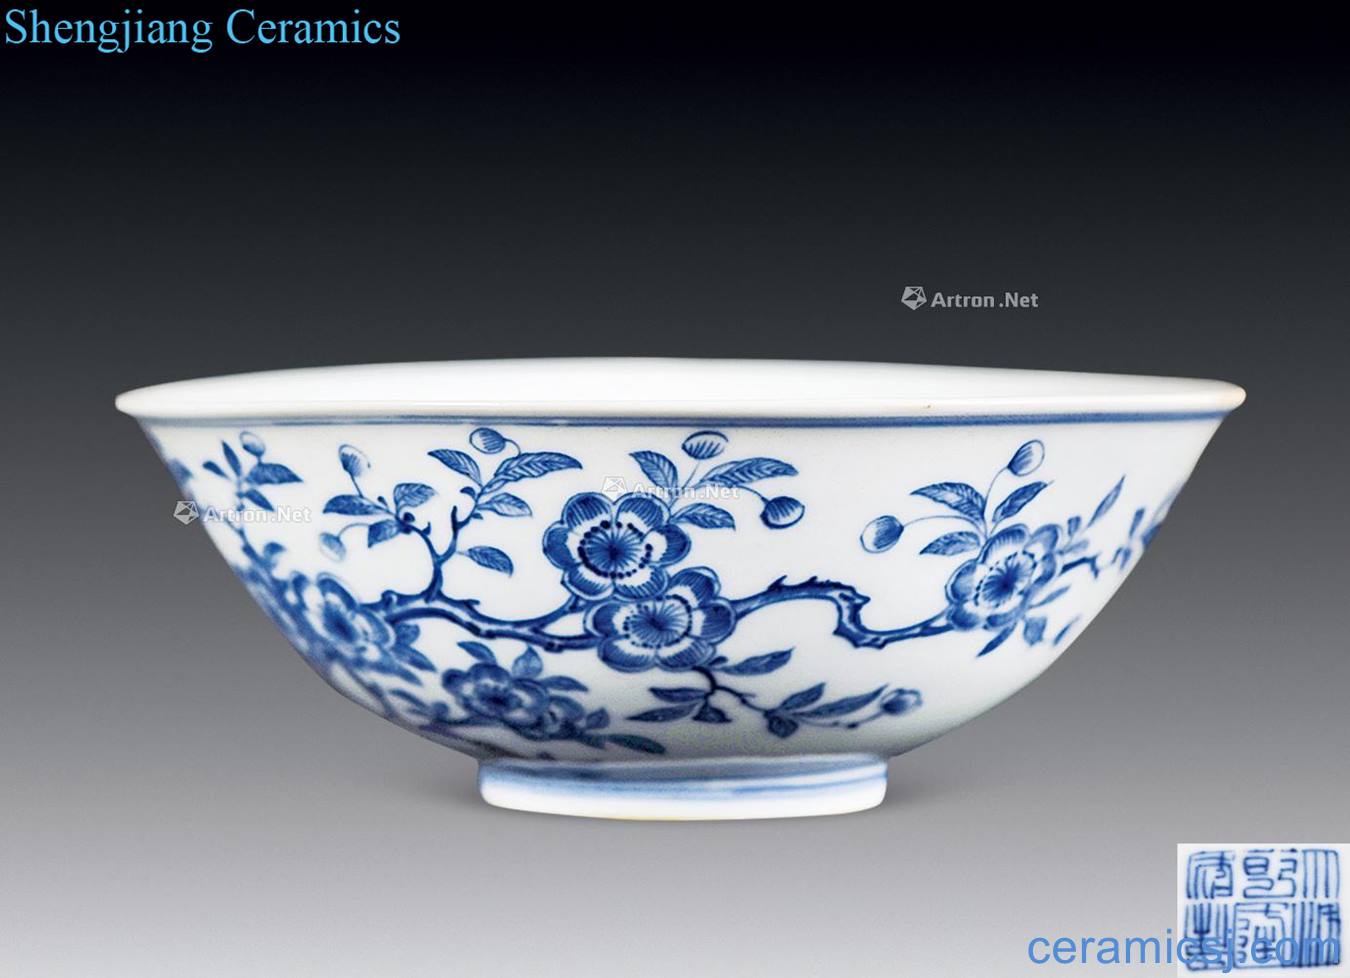 In the qing dynasty Blue and white ruffled branch flowers bowl